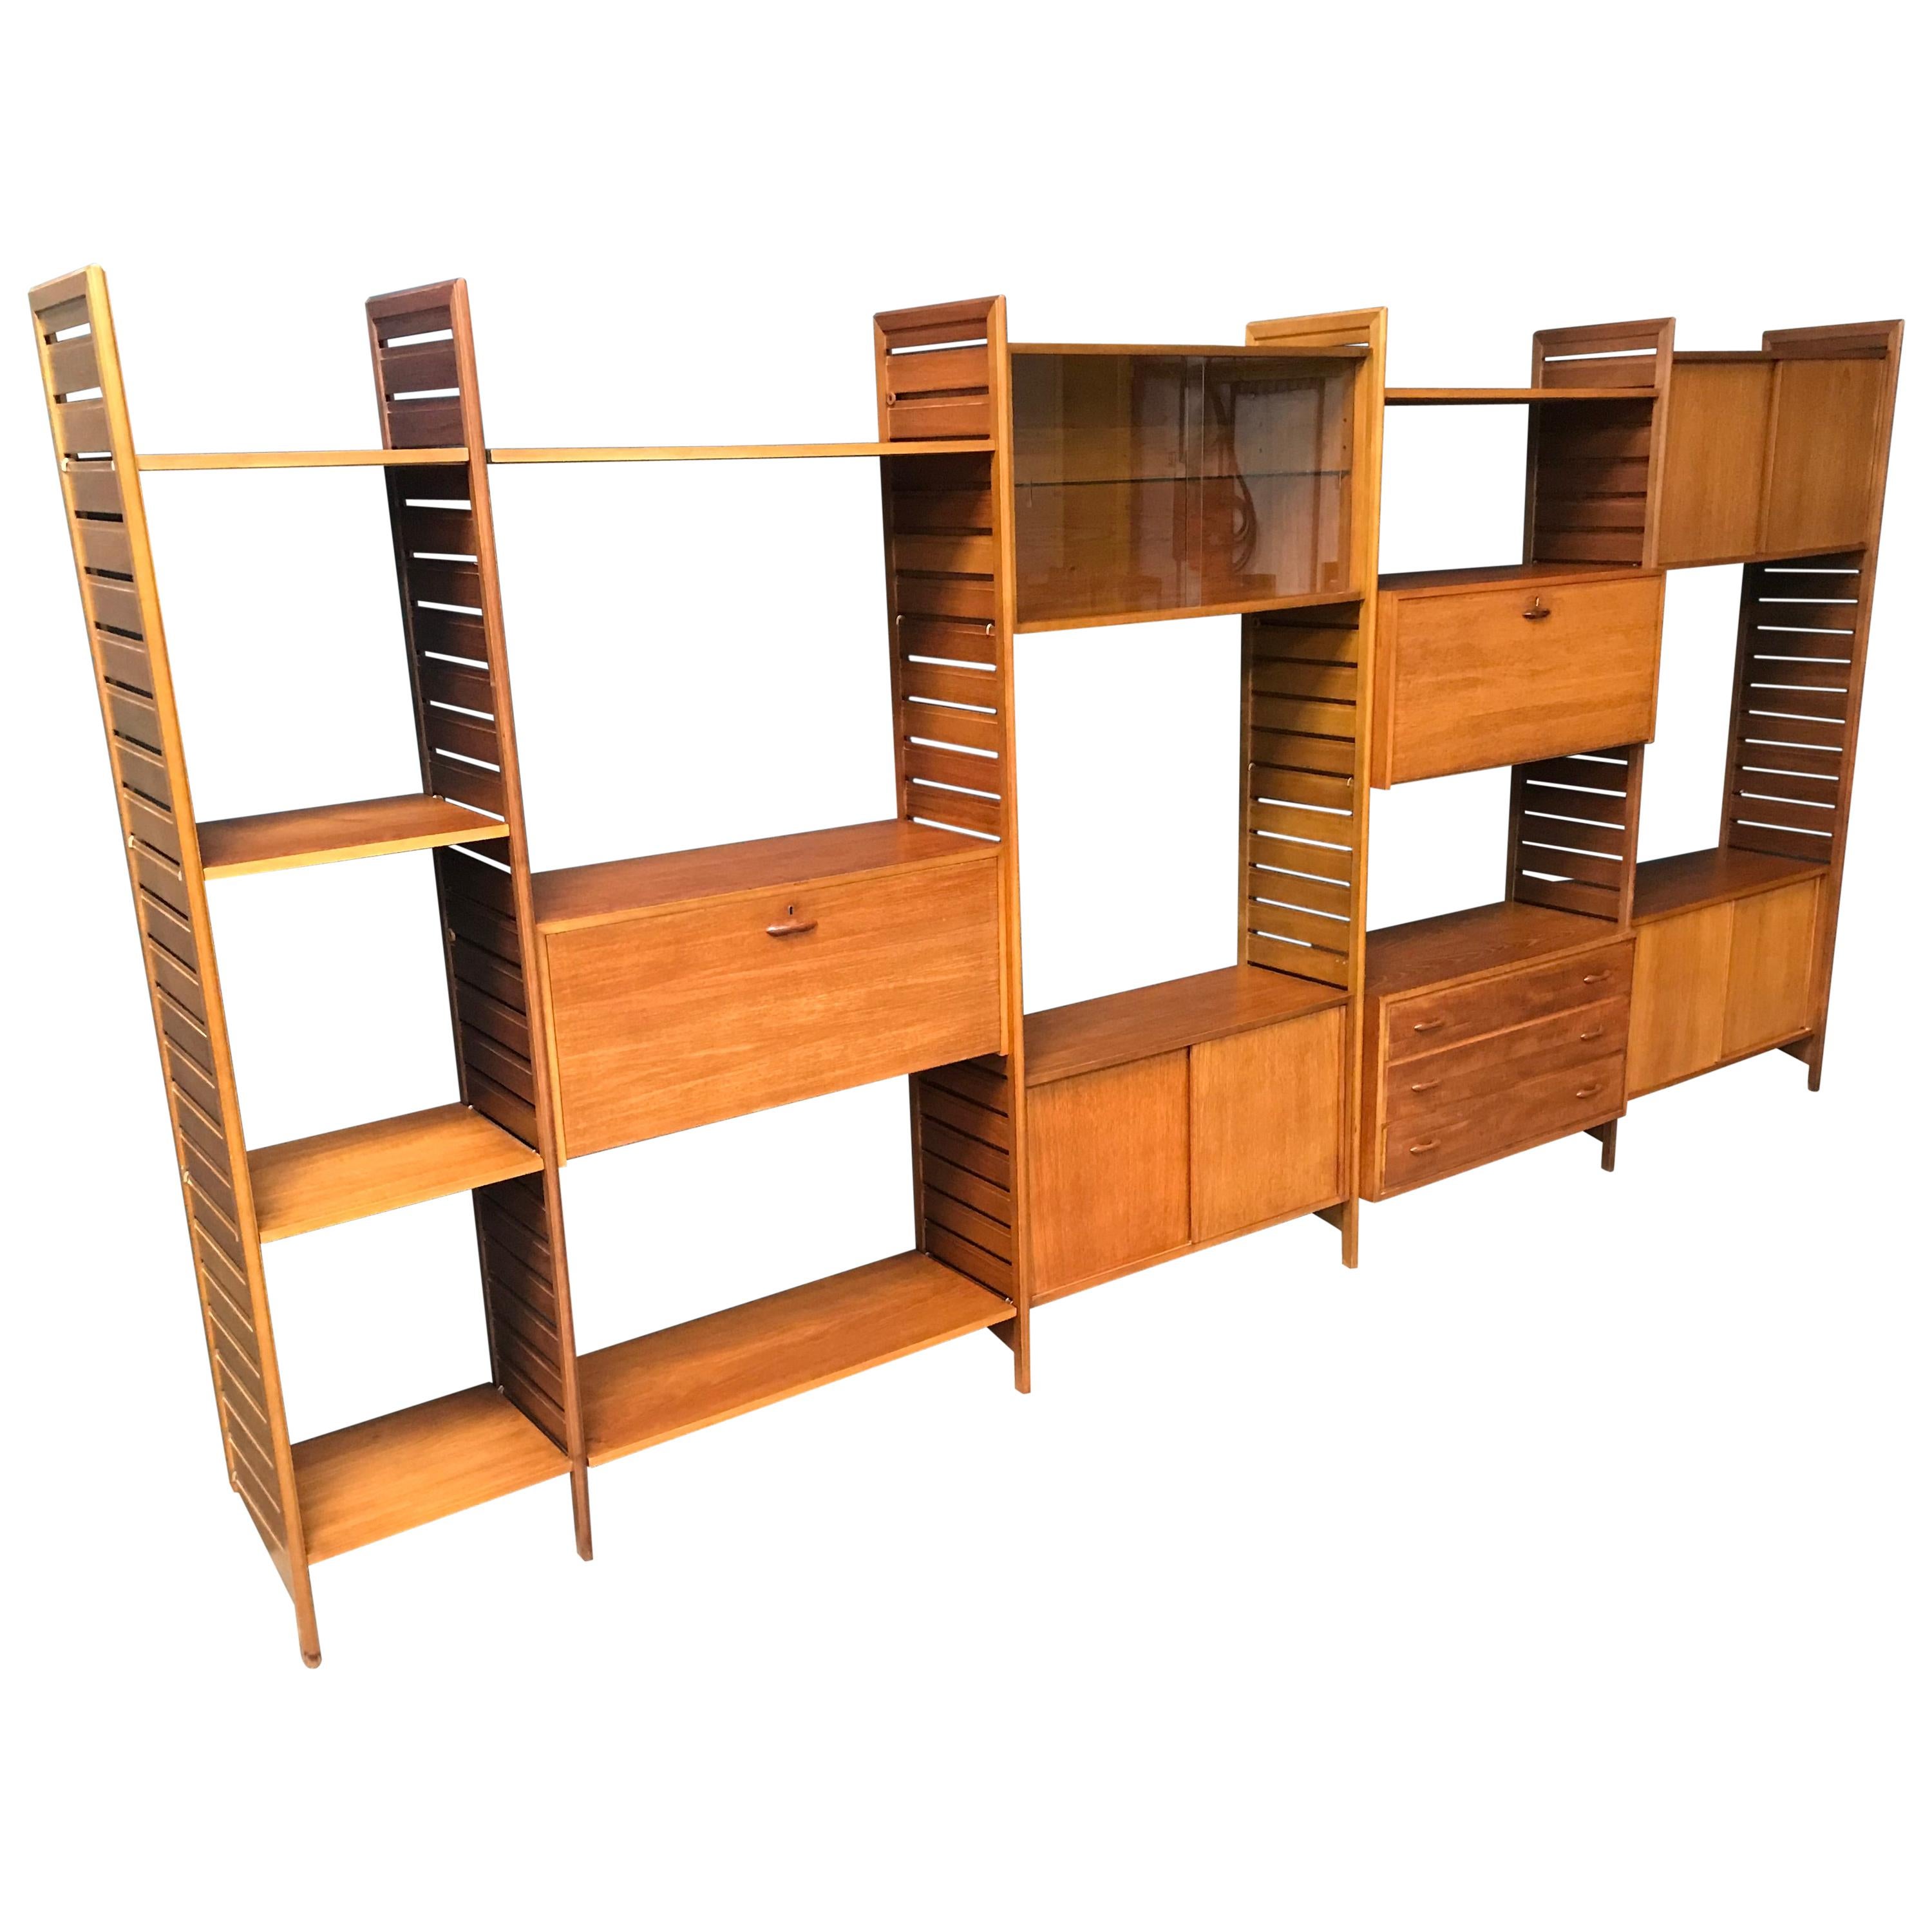 5-Bay Ladderax Teak Midcentury Shelving System by Robert Heal for Staples For Sale